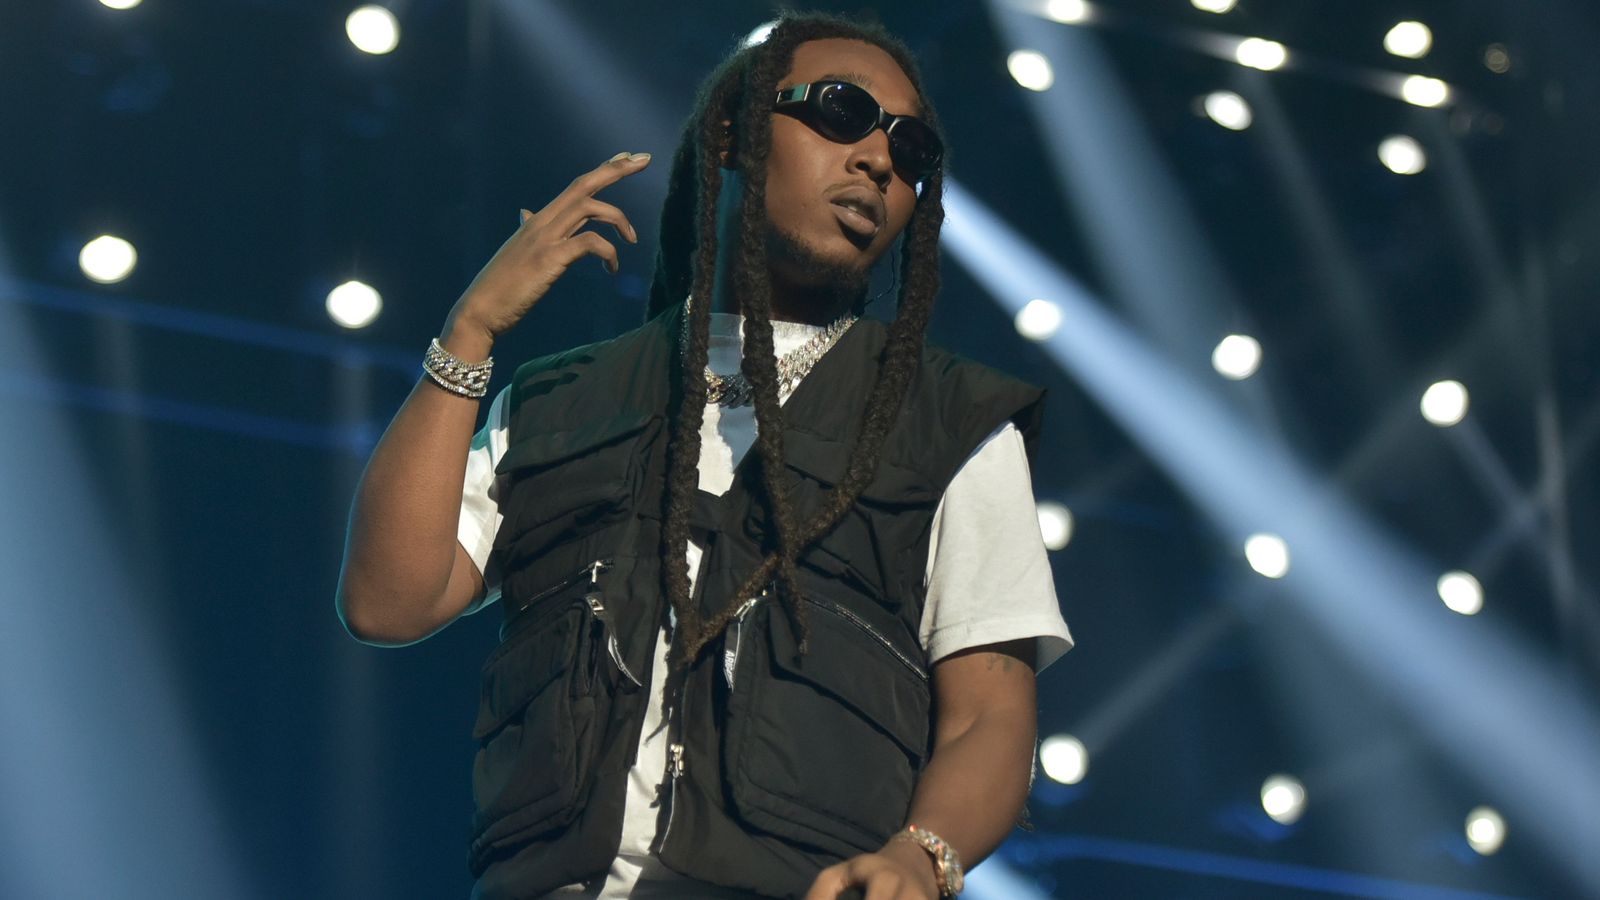 Takeoff shooting: Migos rapper killed by 'stray bullet', says record label 